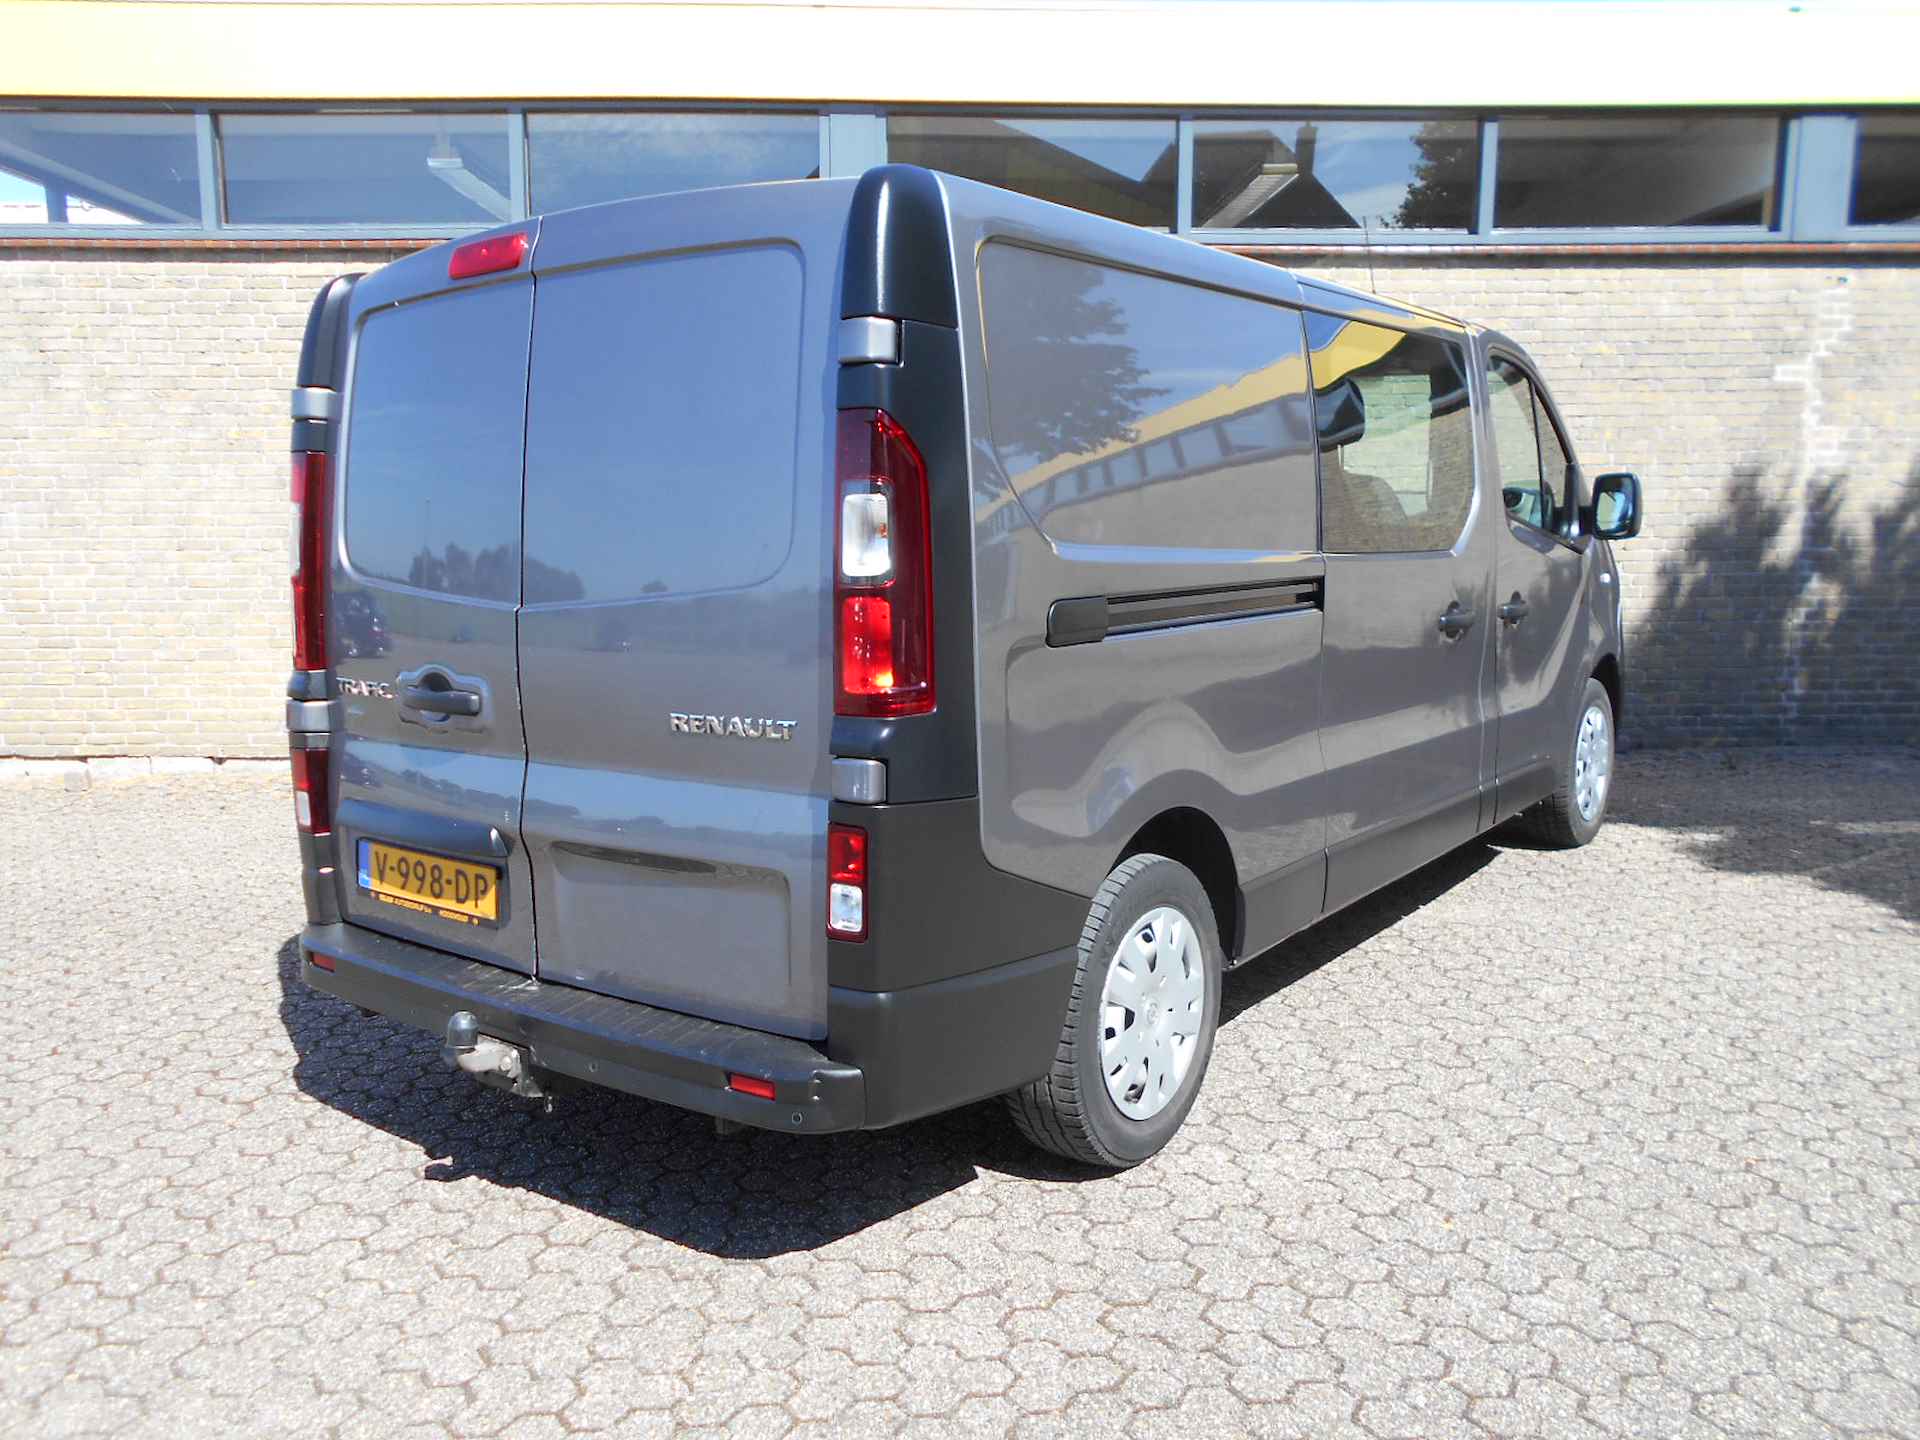 RENAULT TRAFIC Trafic 1.6 Dci dubbele cabine. 5 persoons - 7/21